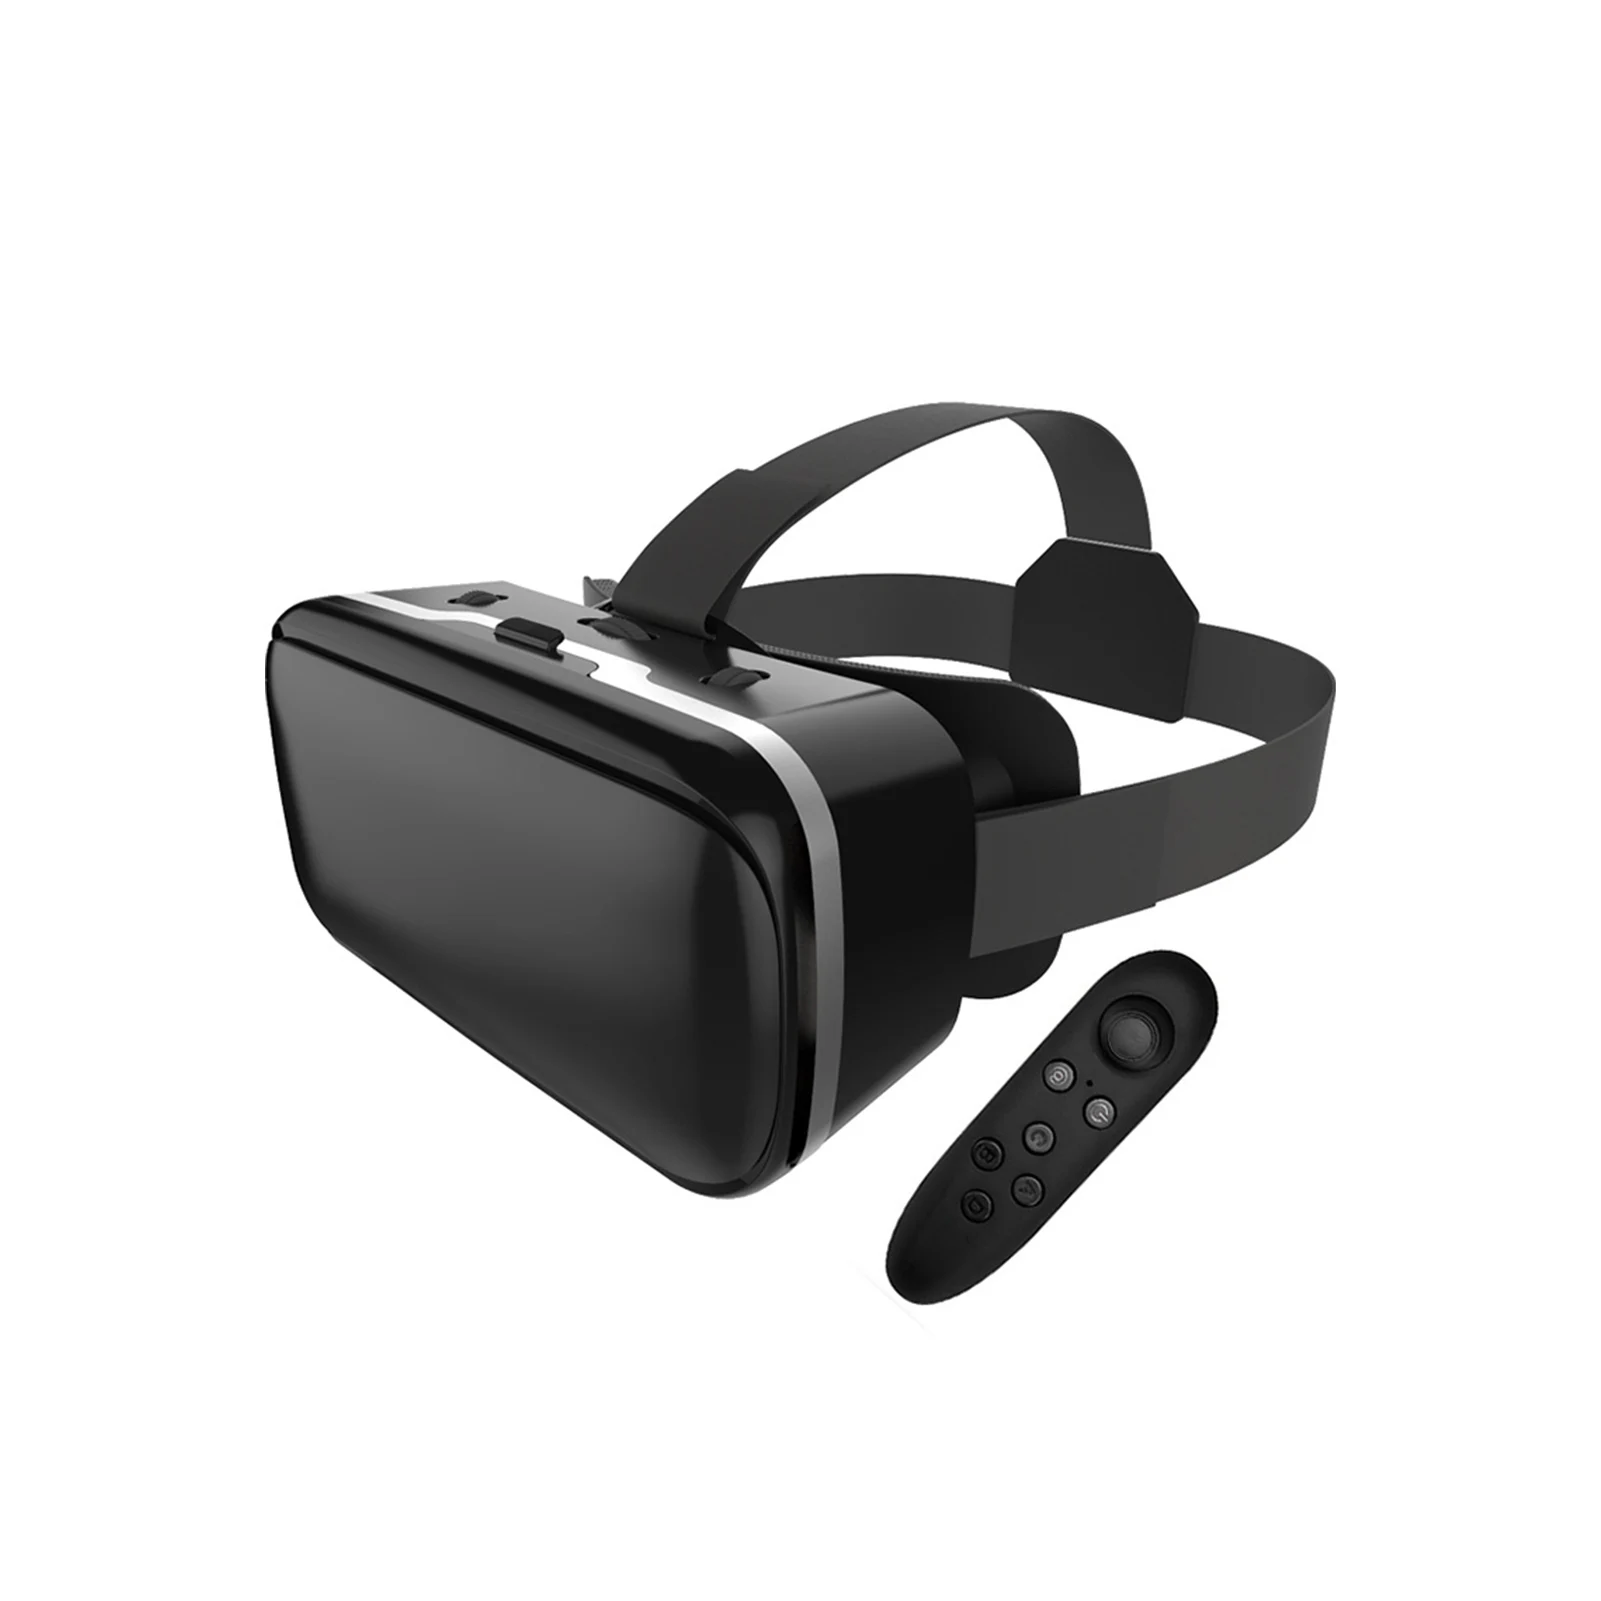 

VR Headset Huge Screen Immersive Soft 3D Glasses Full Review Easy Install Detachable HD Goggles For Phone 4.5 To 6inch